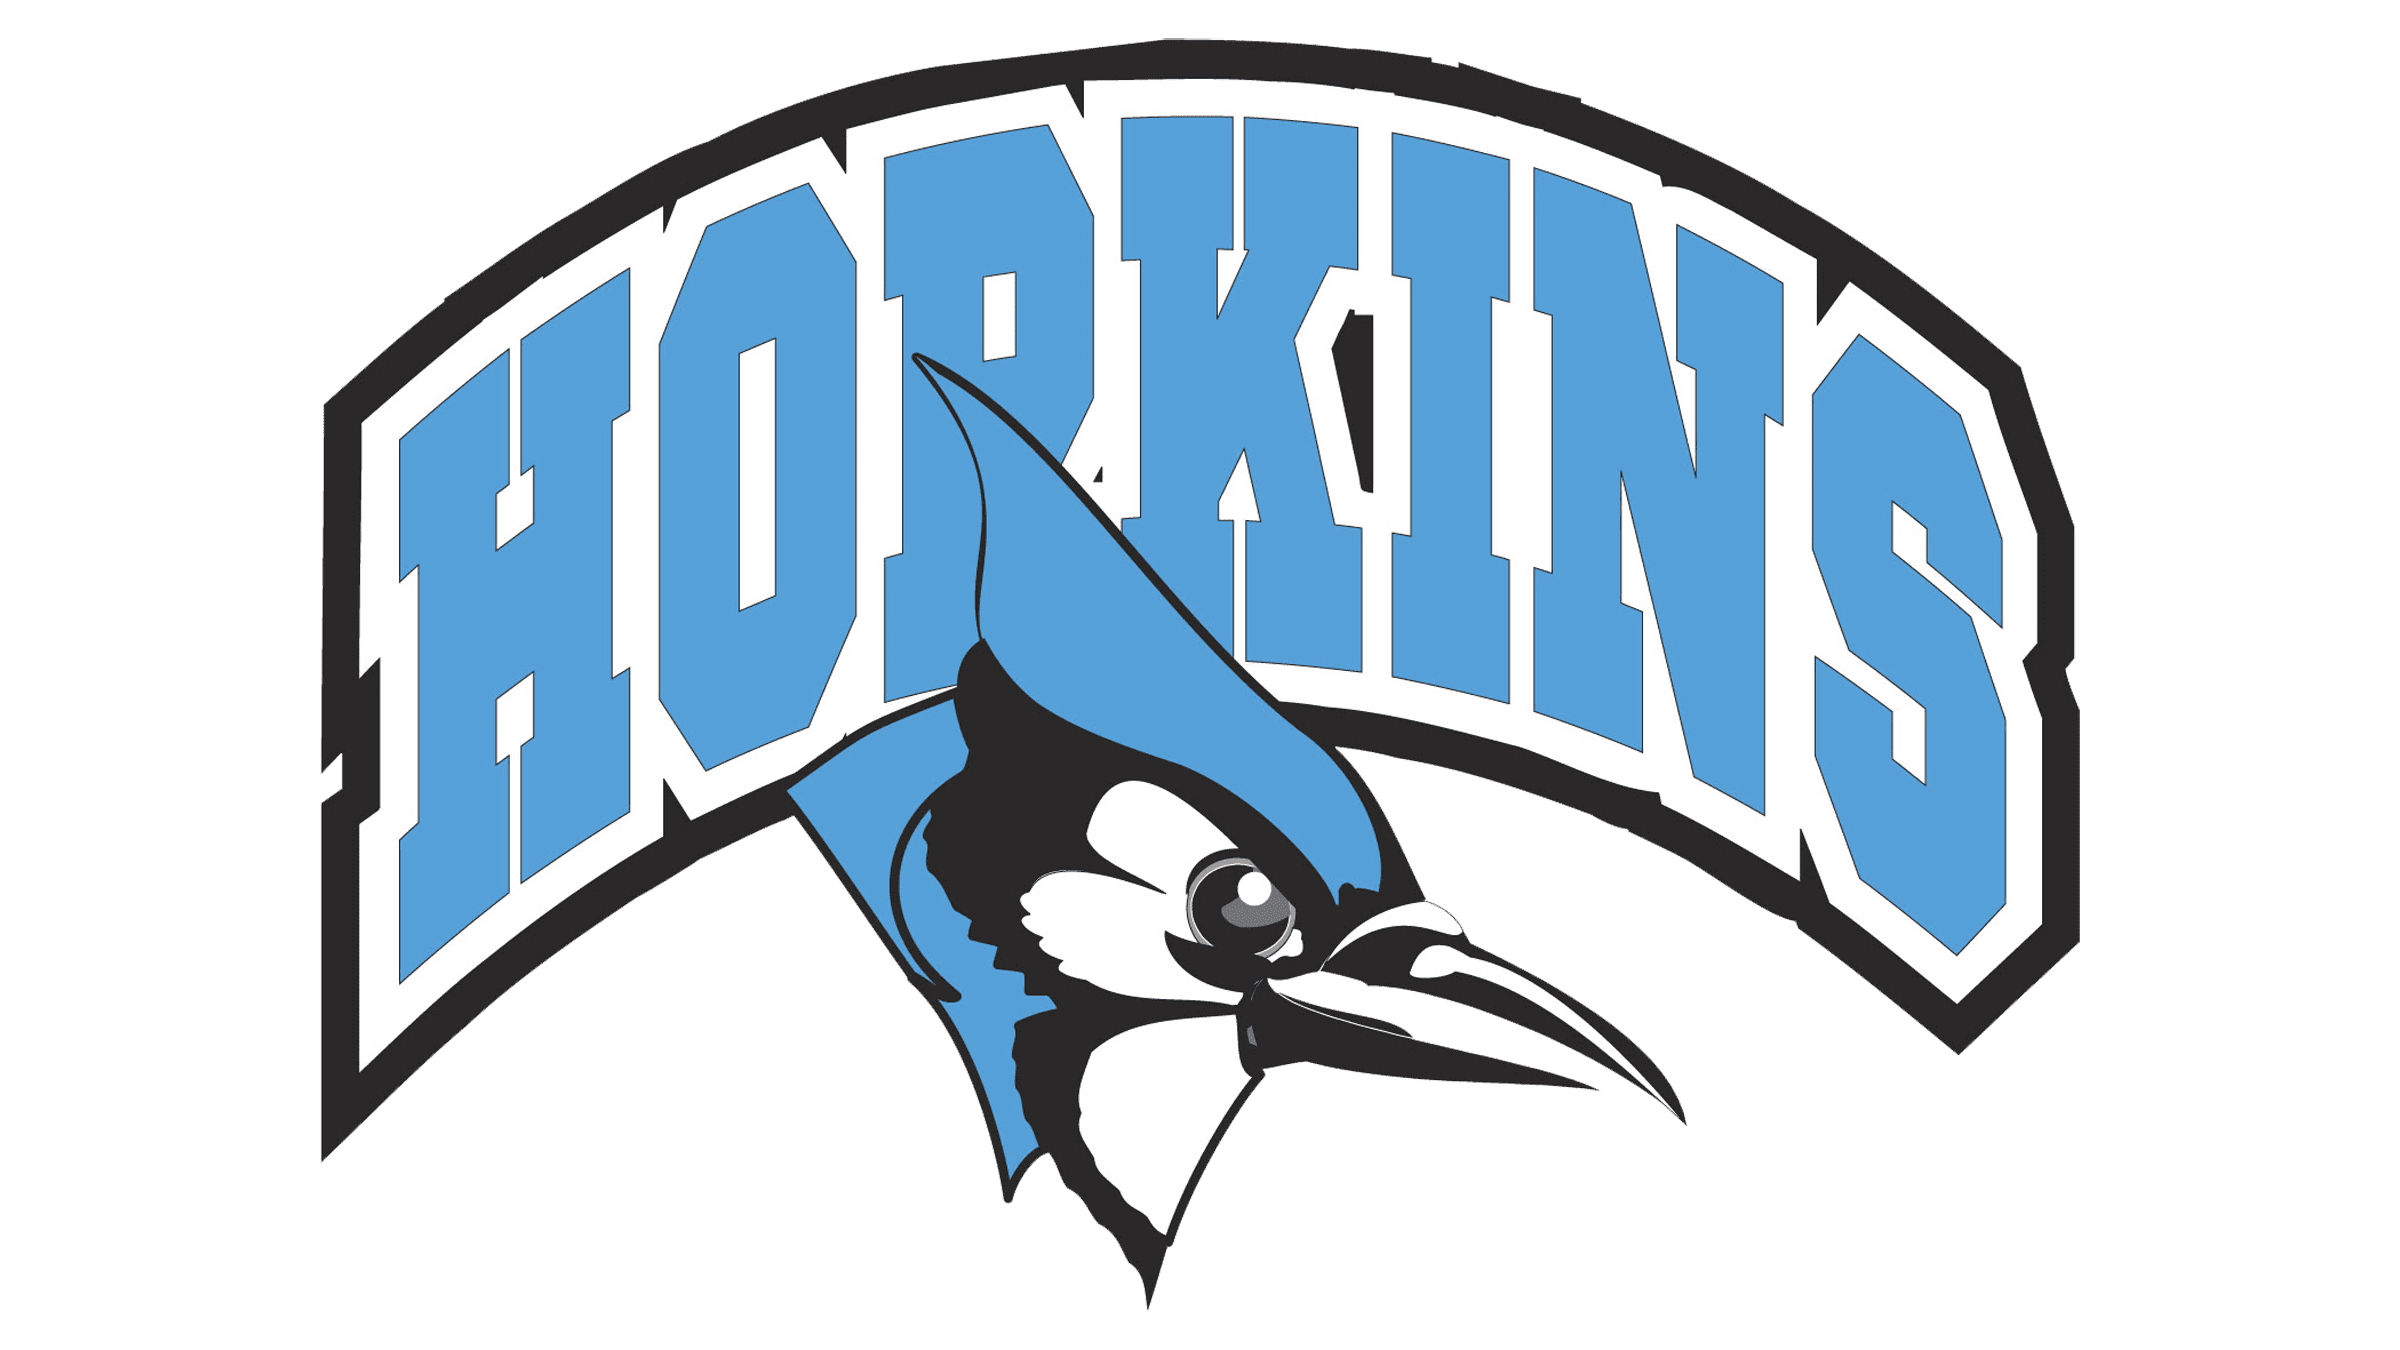 Johns Hopkins University Logo and symbol, meaning, history, PNG, brand